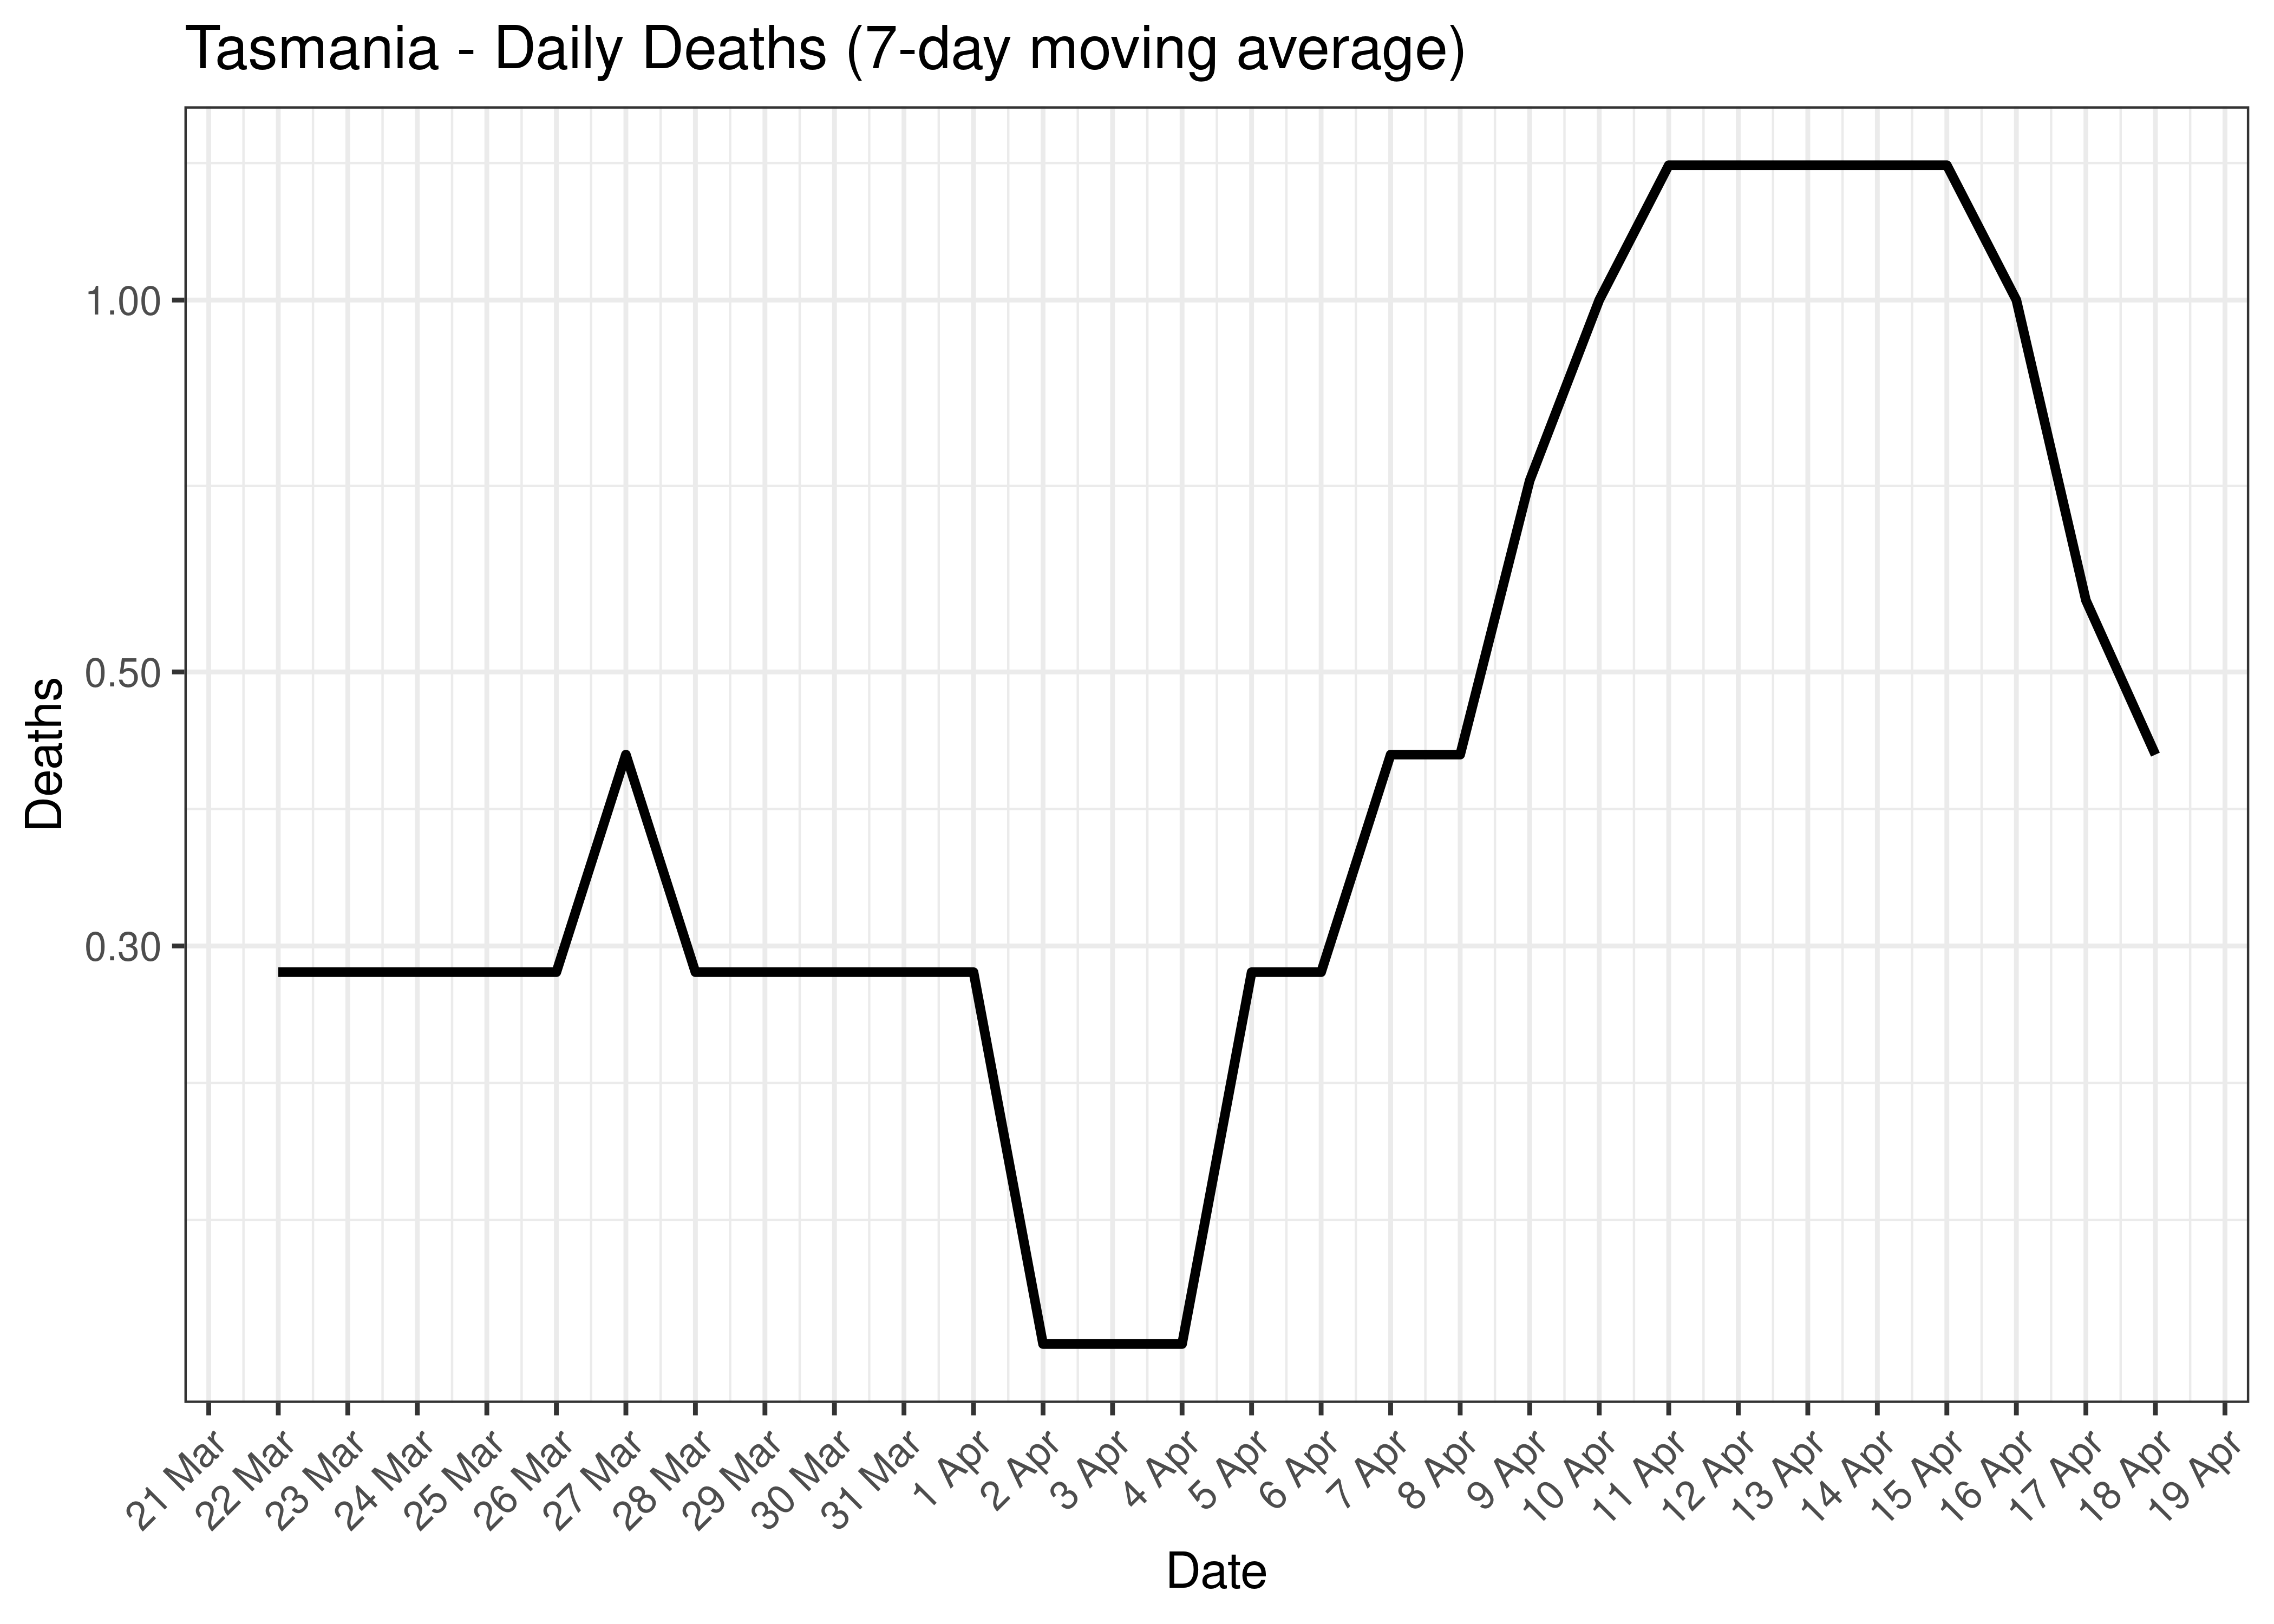 Tasmania - Daily Deaths for Last 30-days (7-day moving average)